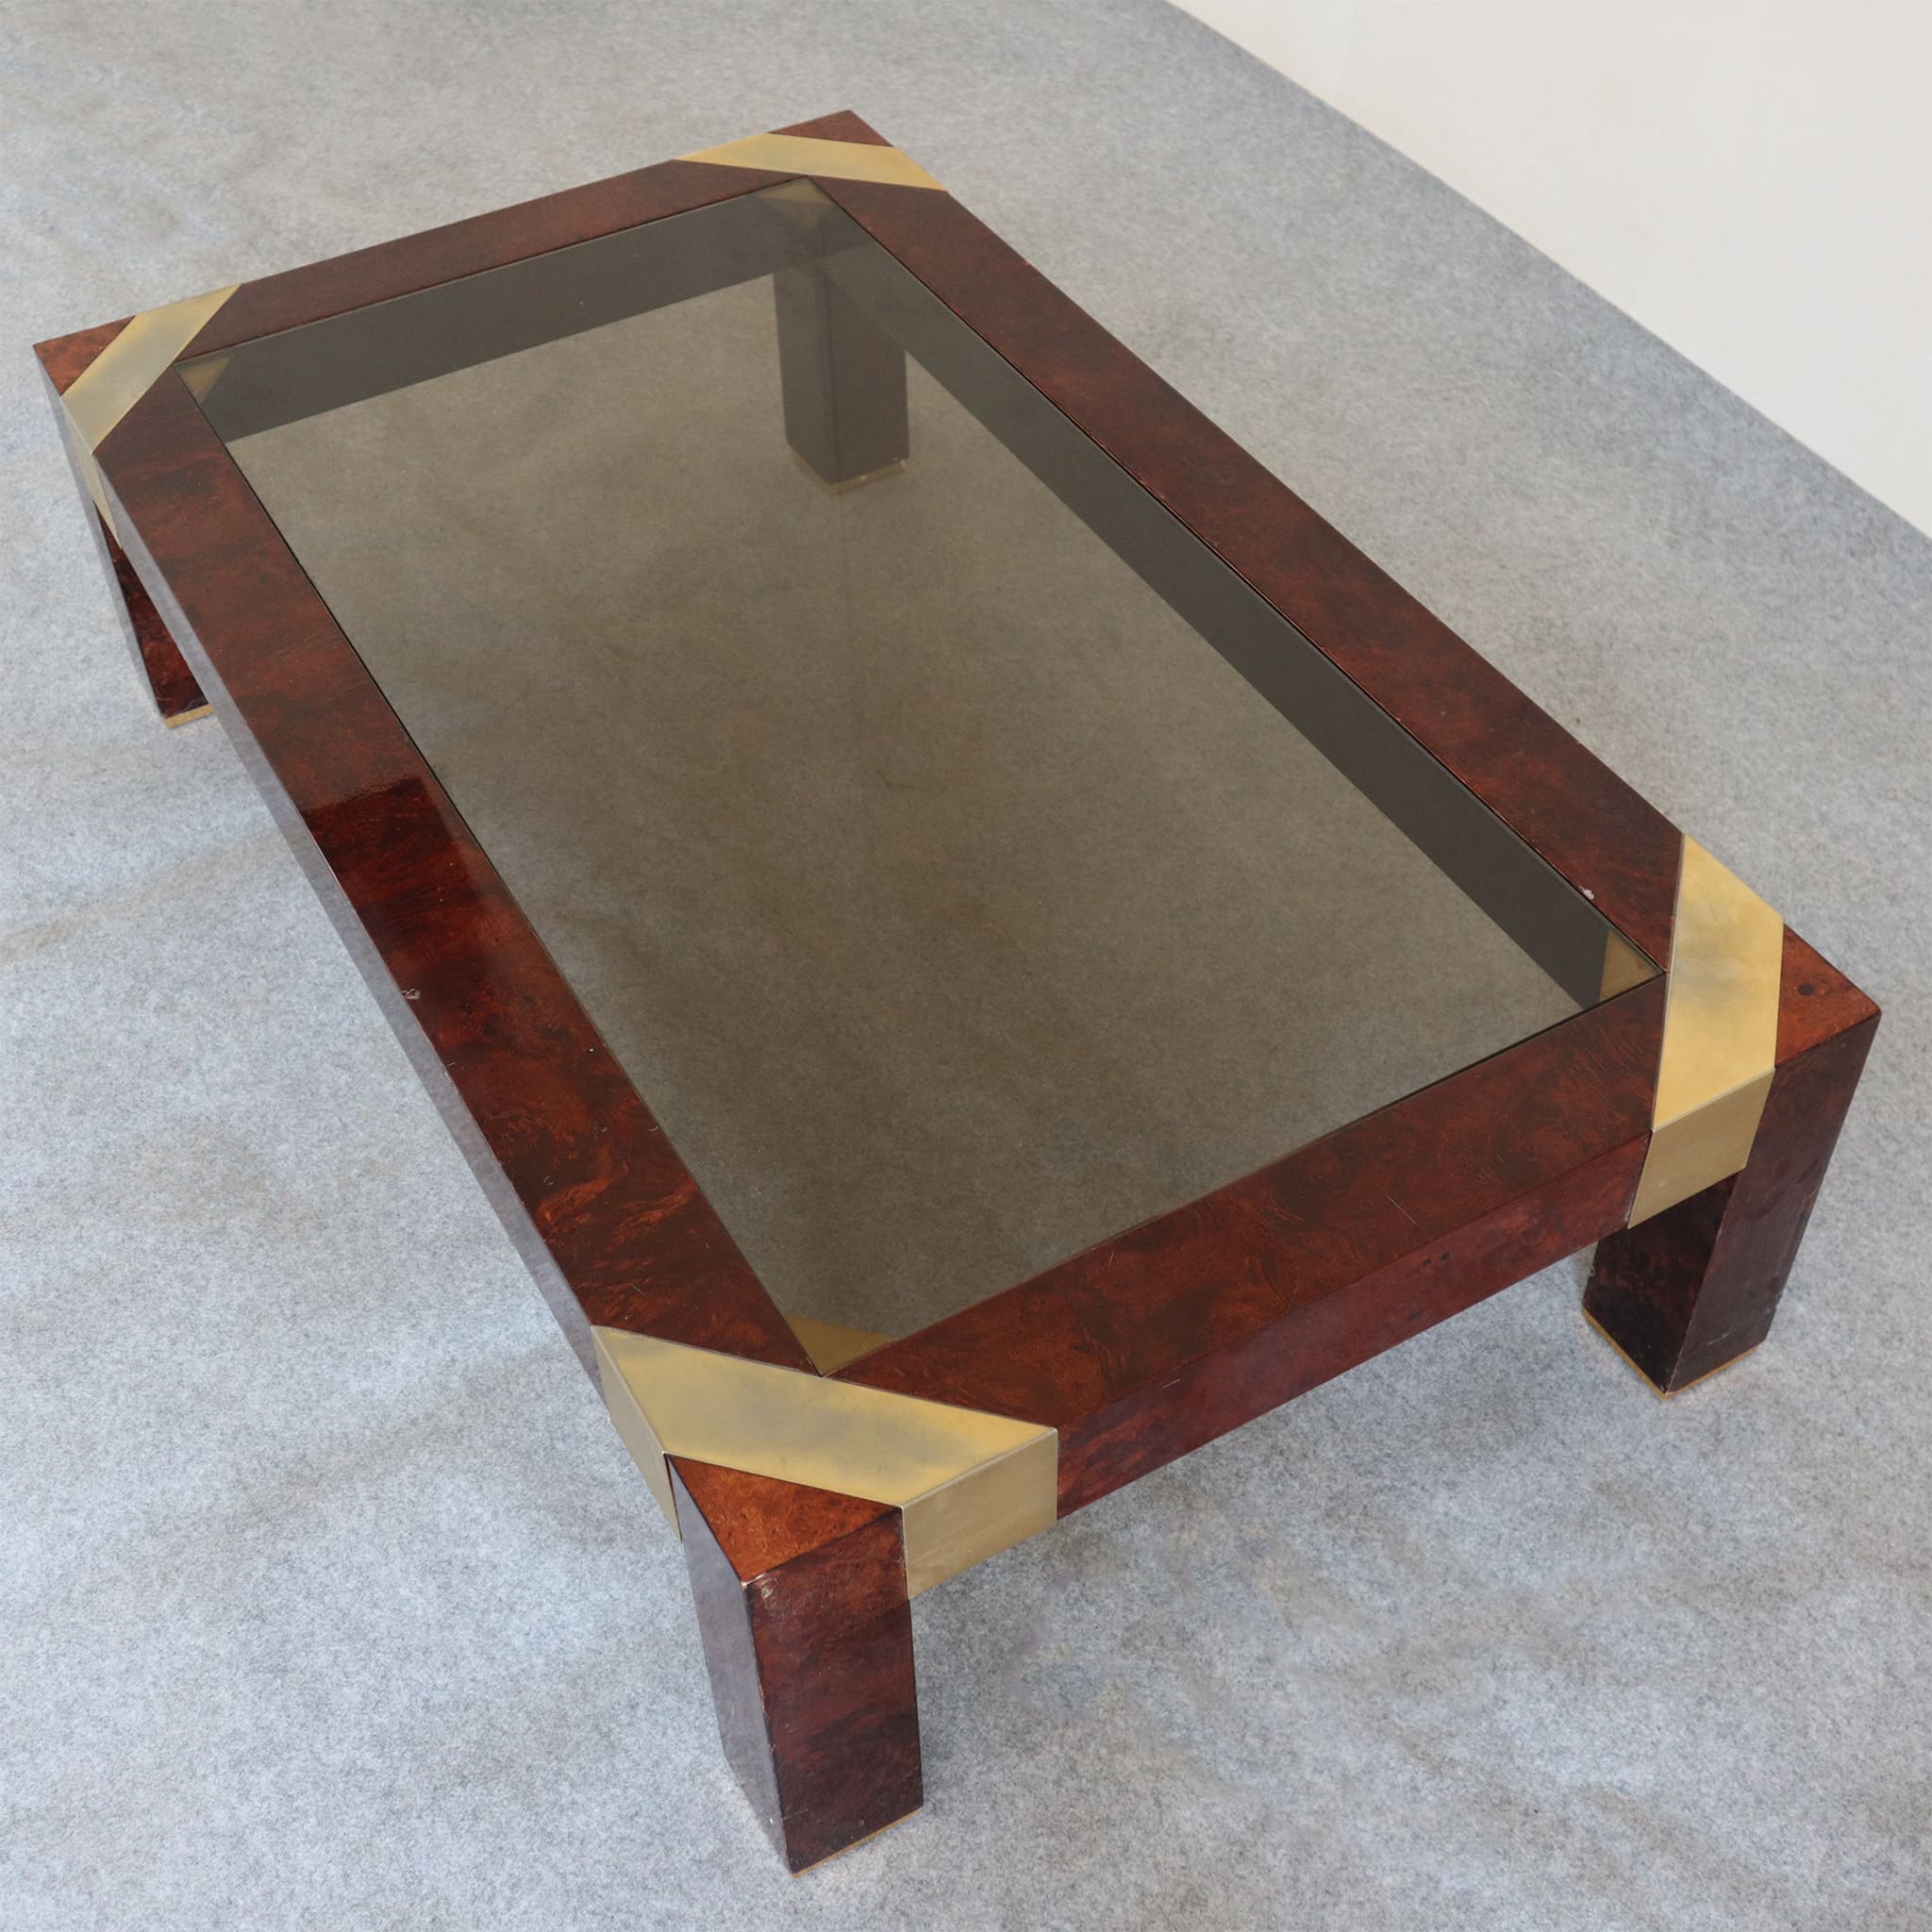 visionidepoca-modern-art-coffee-table-in-briar-and-brass-by-Jean-Claude-Mahey-made-in-france-1970s-smoked-glass-view-from-above